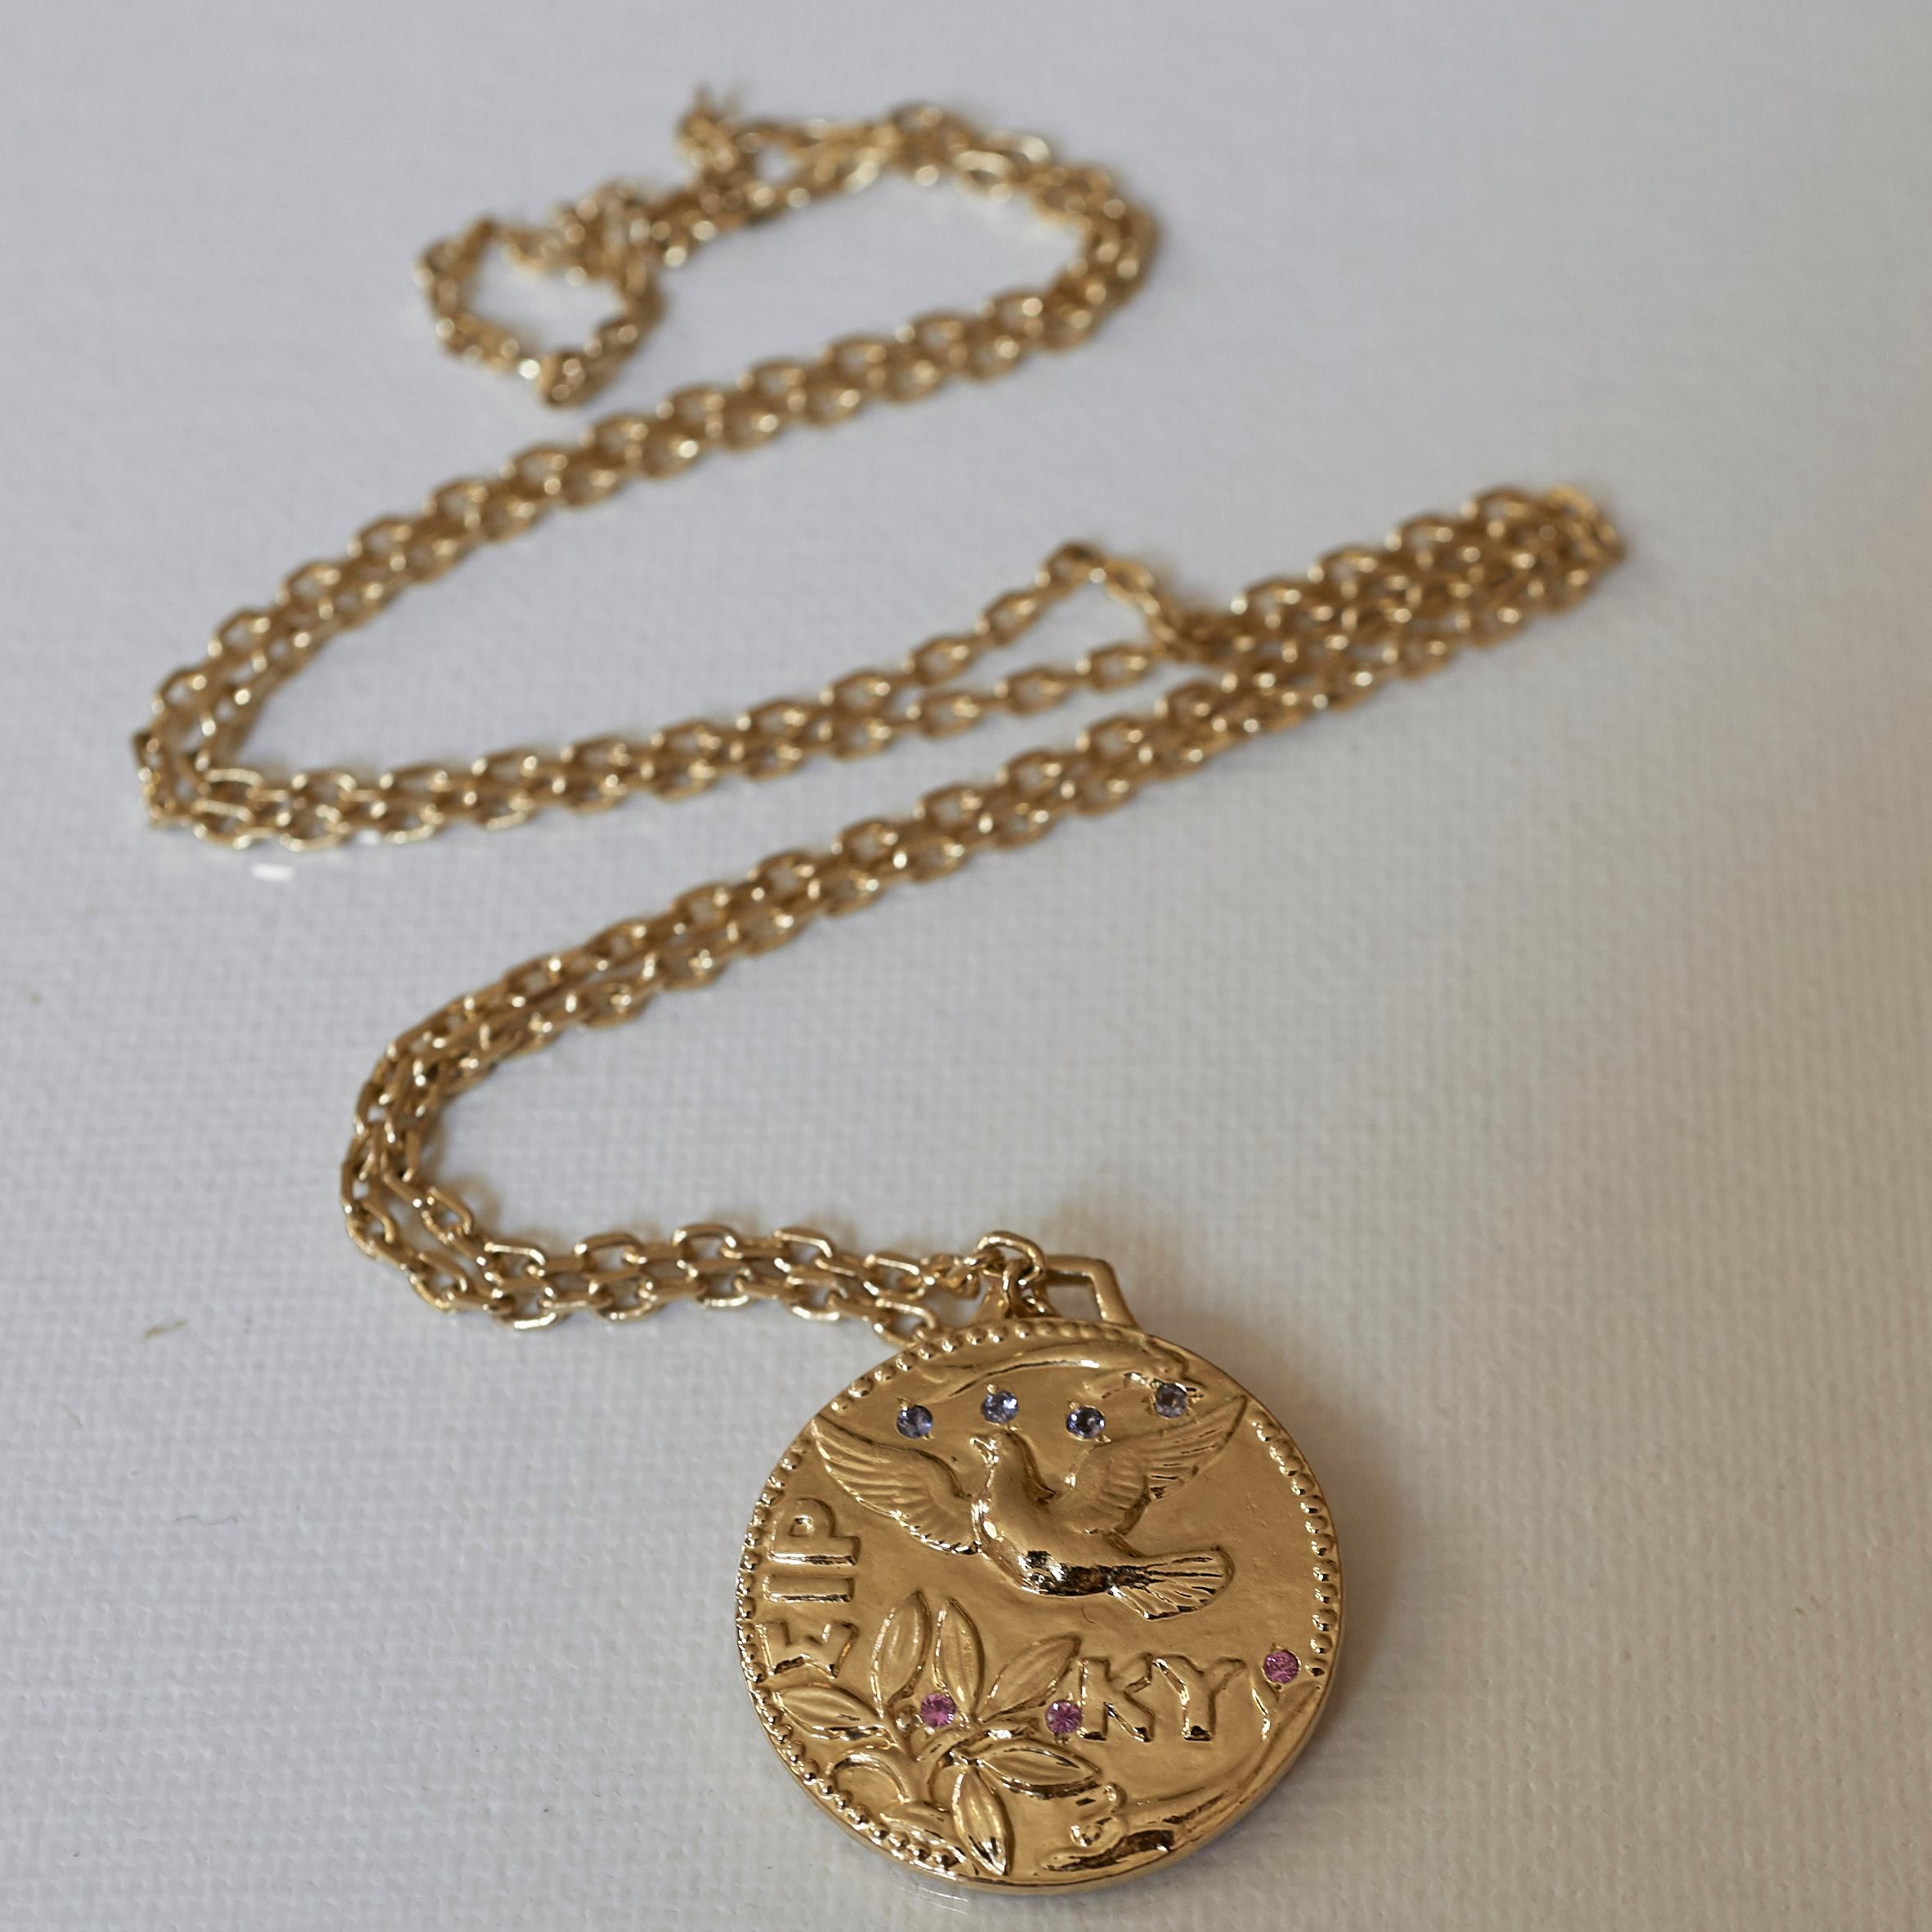 Aquamarine  Ruby Long Chain Medal Necklace Dove Pegasus Greek J Dauphin

3 Aquamarines and 4 Ruby Gold Filled Chain 28